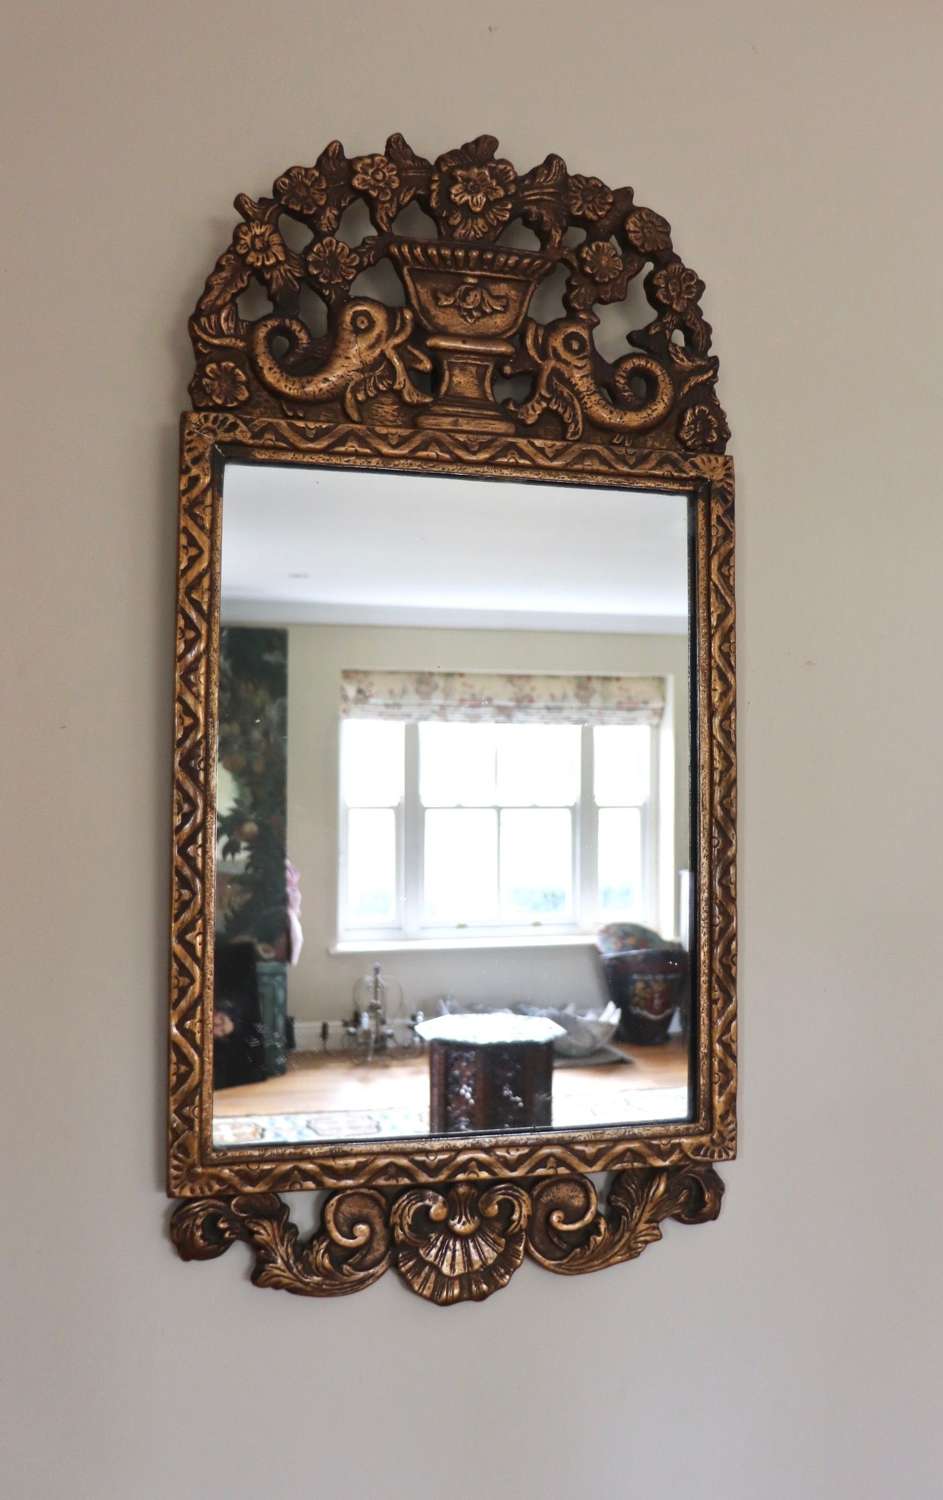 Early 20th century gilt mirror with dolphin carvings